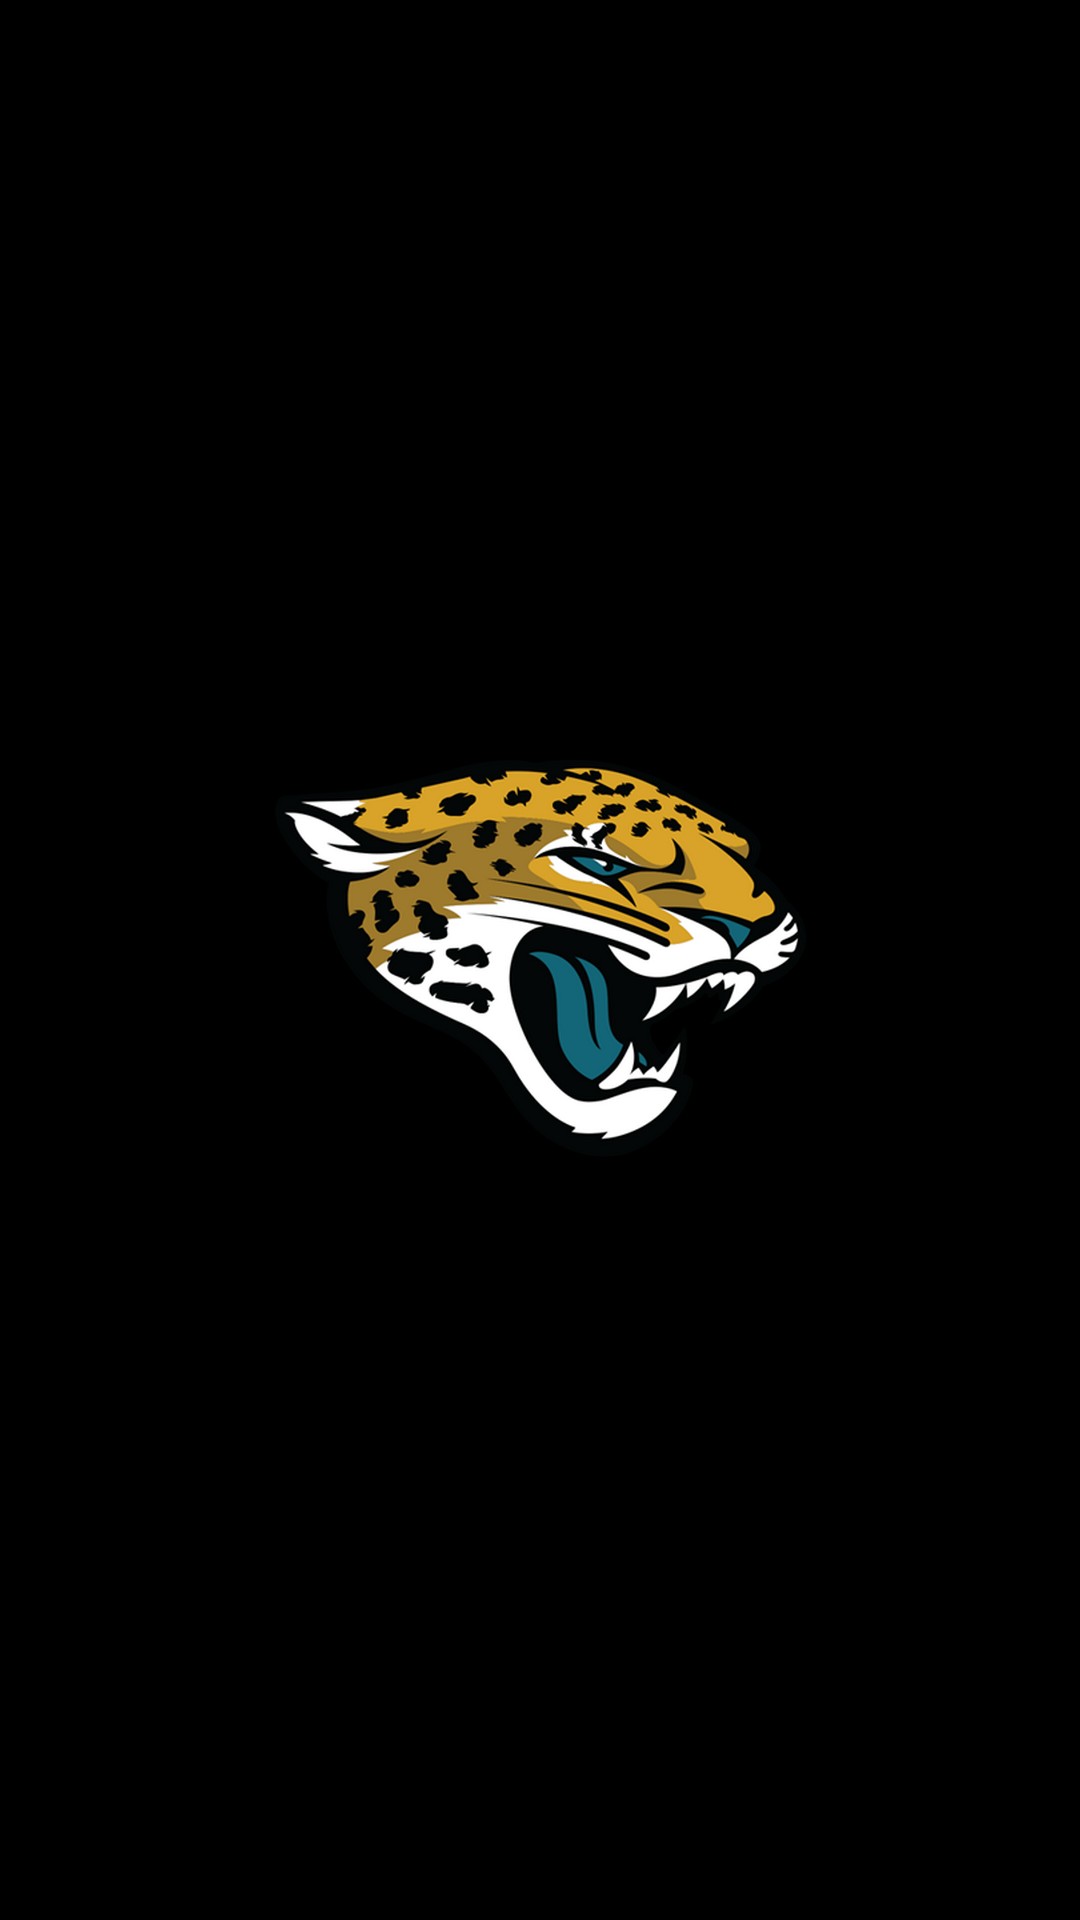 Wallpapers iPhone Jacksonville Jaguars With high-resolution 1080X1920 pixel. Donwload and set as wallpaper for your iPhone X, iPhone XS home screen backgrounds, XS Max, XR, iPhone8 lock screen wallpaper, iPhone 7, 6, SE, and other mobile devices